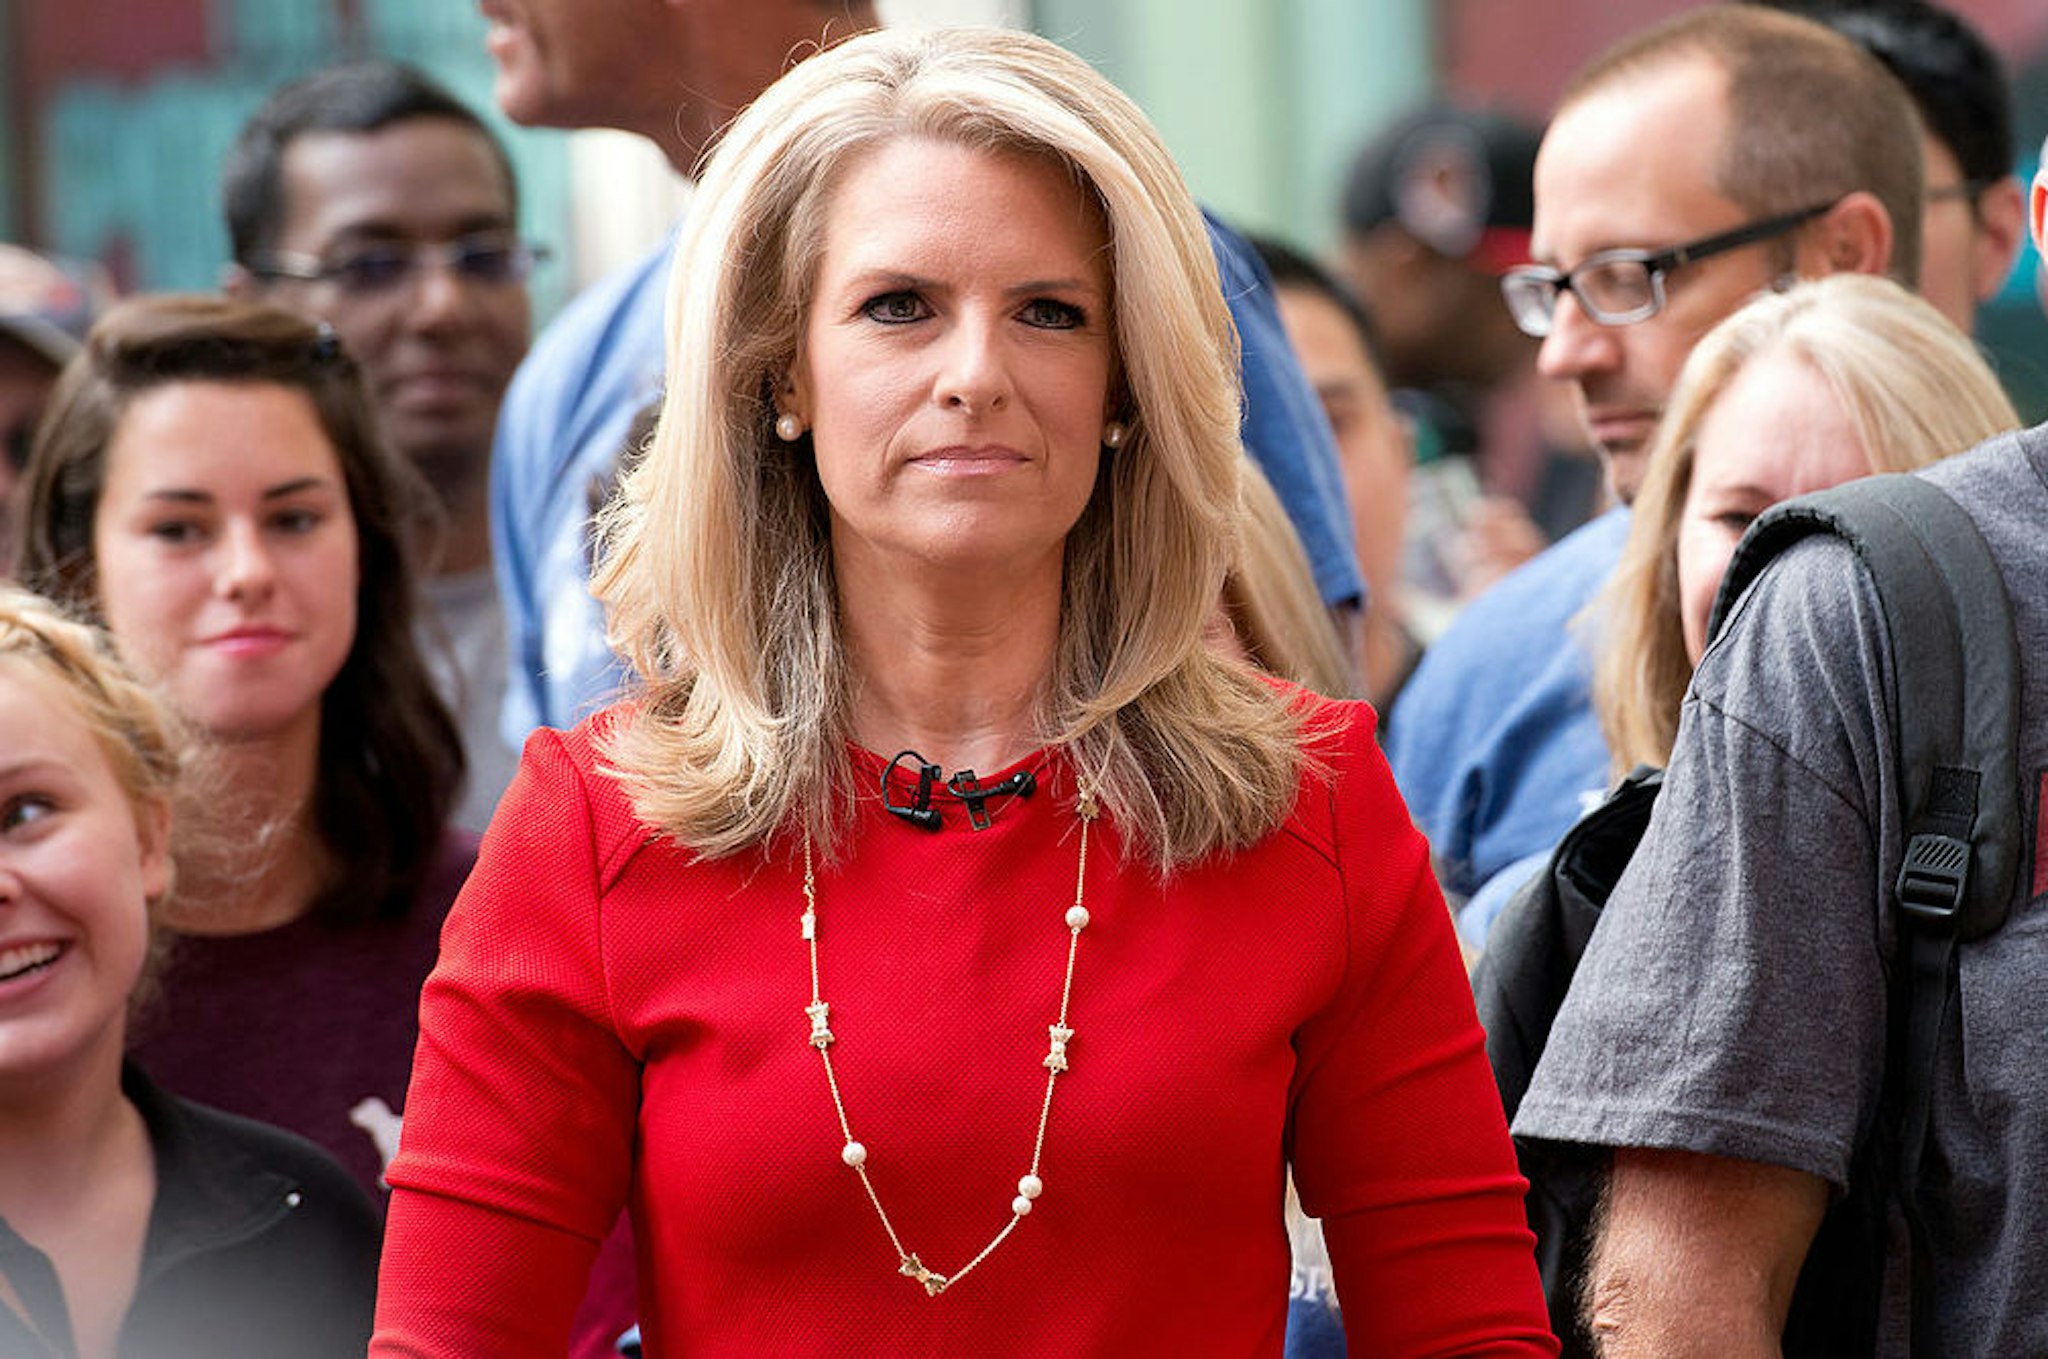 Host Janice Dean attends "FOX & Friends" All American Concert Series outside of FOX Studios on August 29, 2014 in New York City.